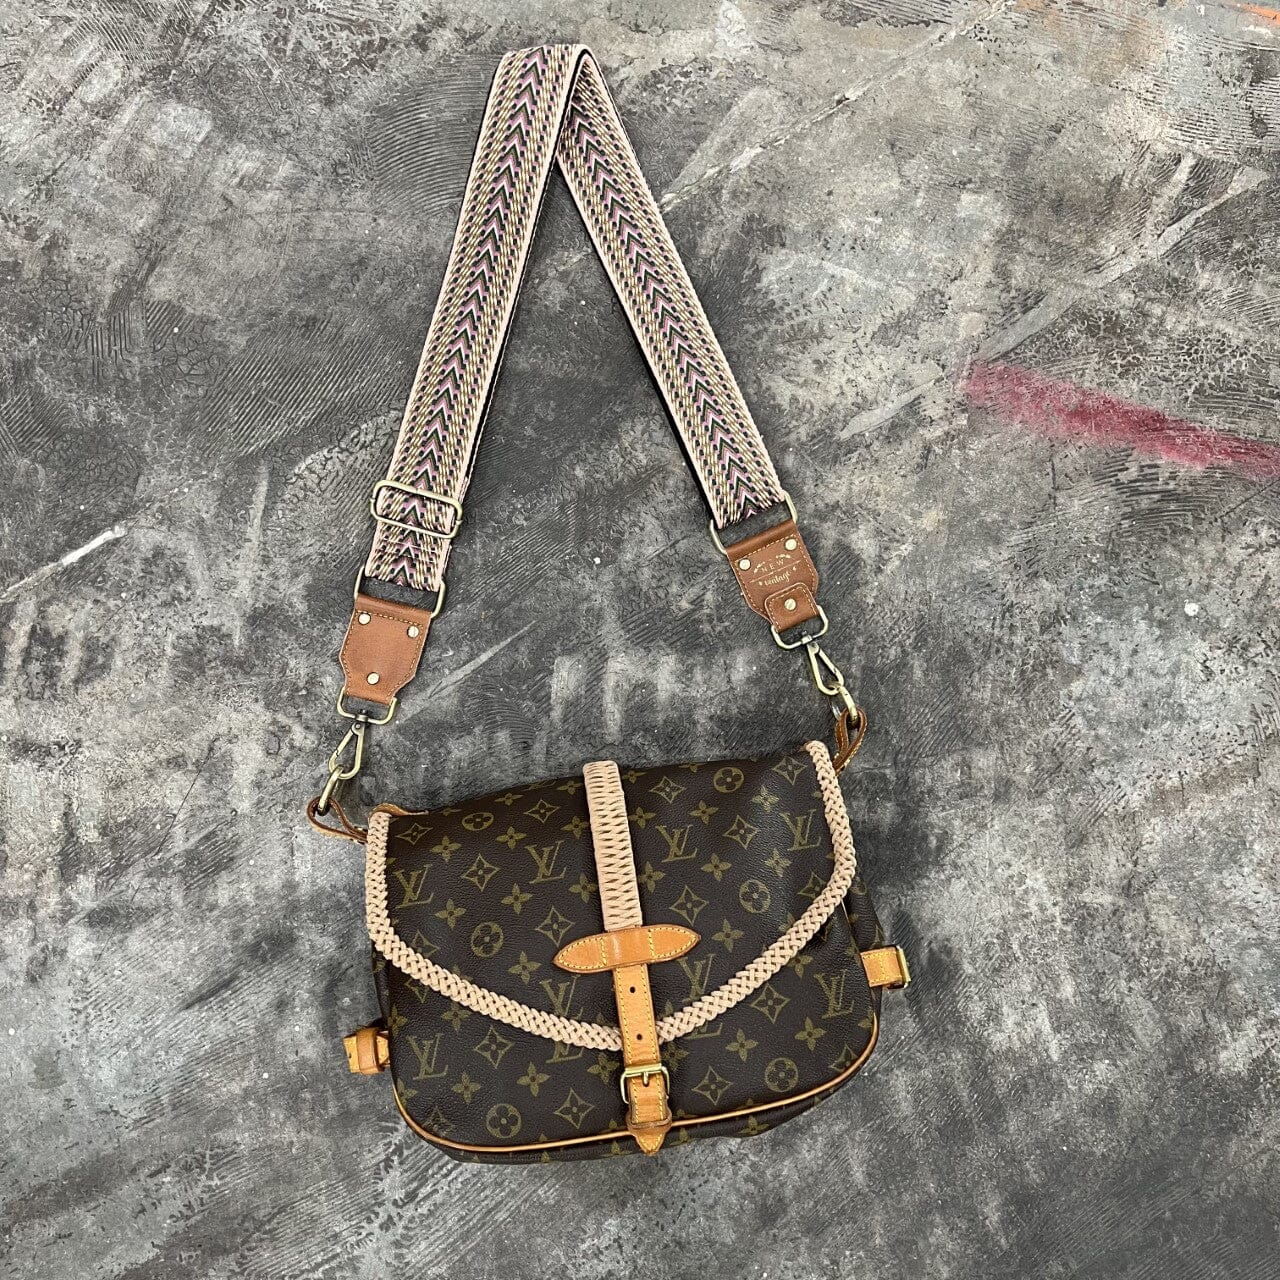 Hand Laced, Preloved Louis Vuitton Saumur 30 - "Clean and Simple Artwork" Artwork Bag by New Vintage